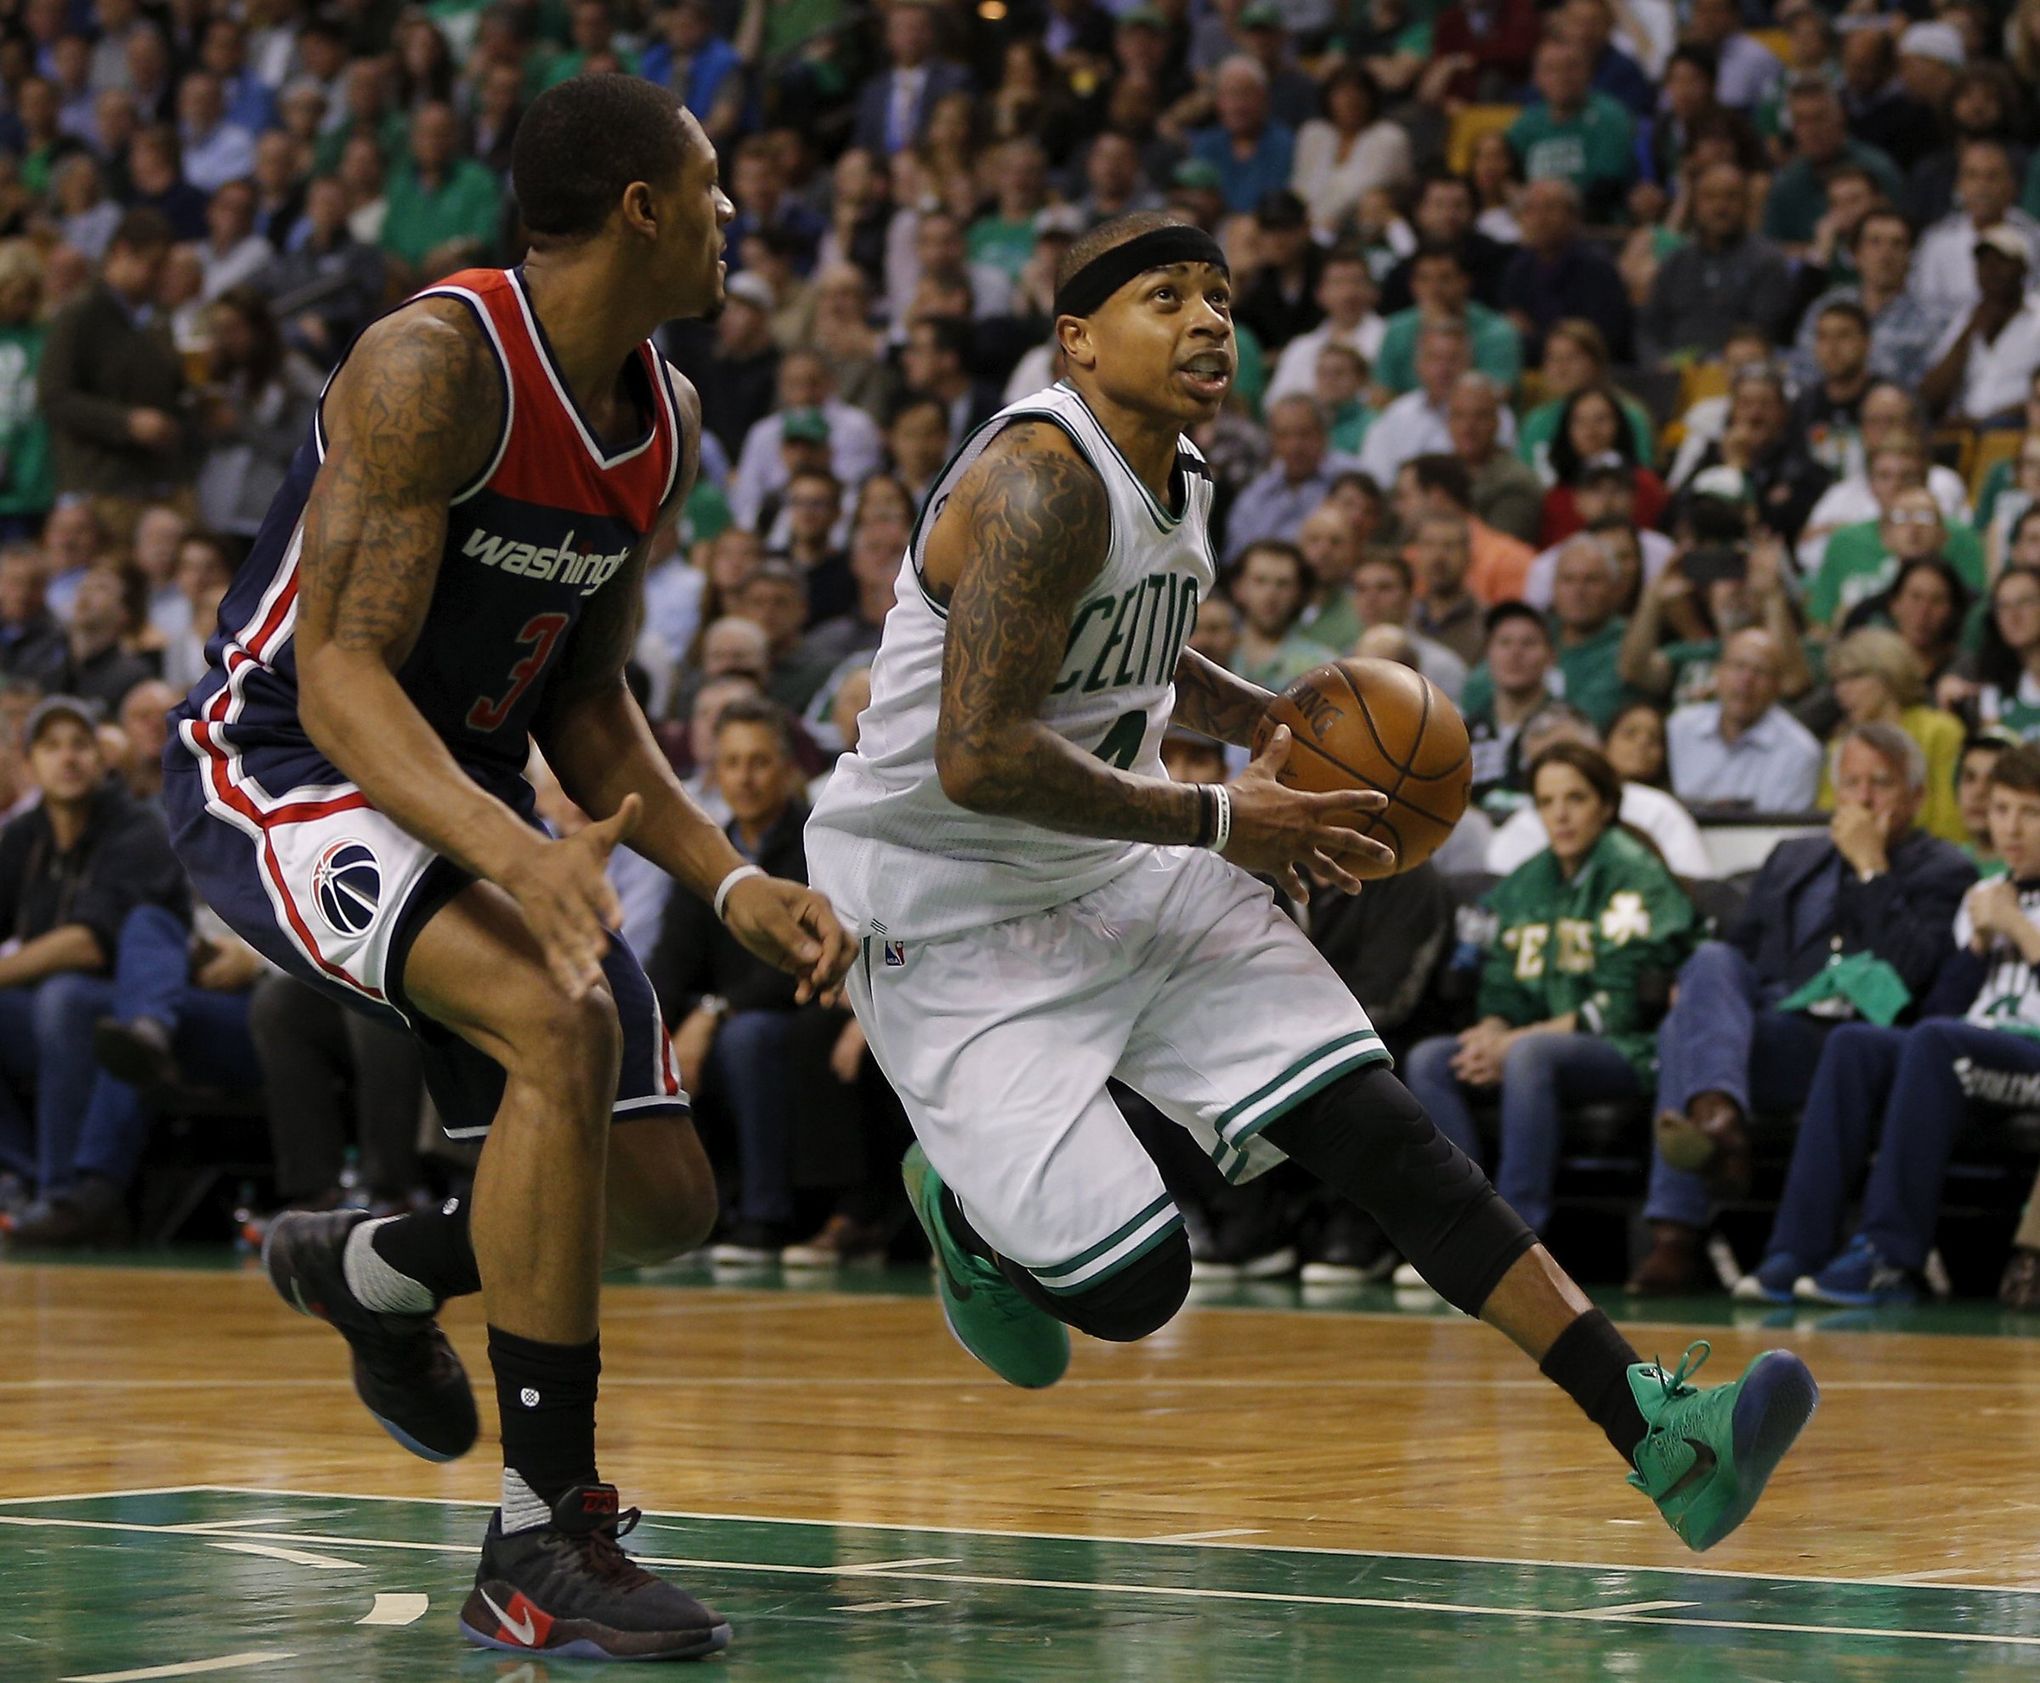 Isaiah Thomas dedicated his 53-point Game 2 performance to his